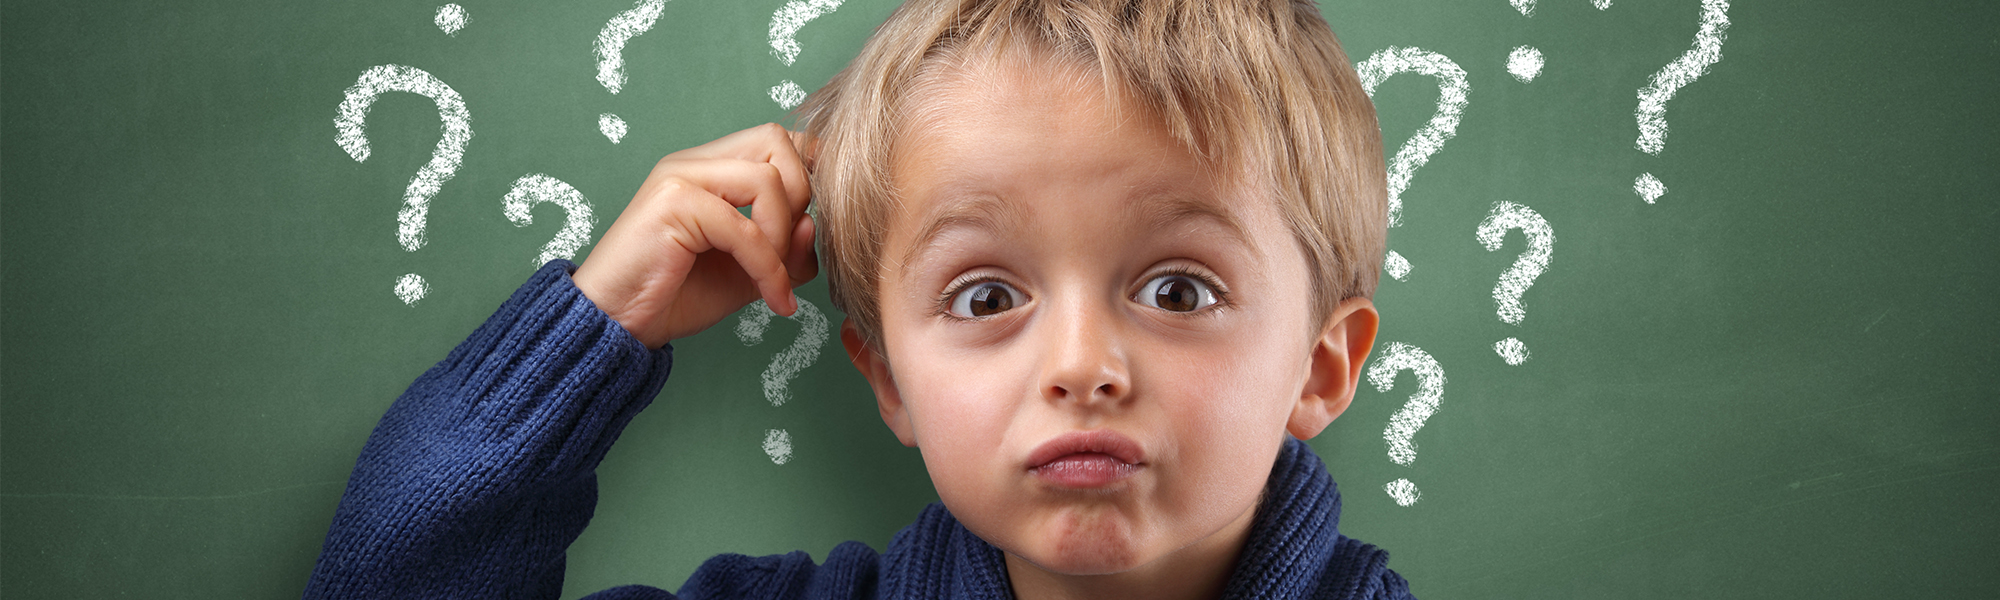 child scratching his head with question marks around him